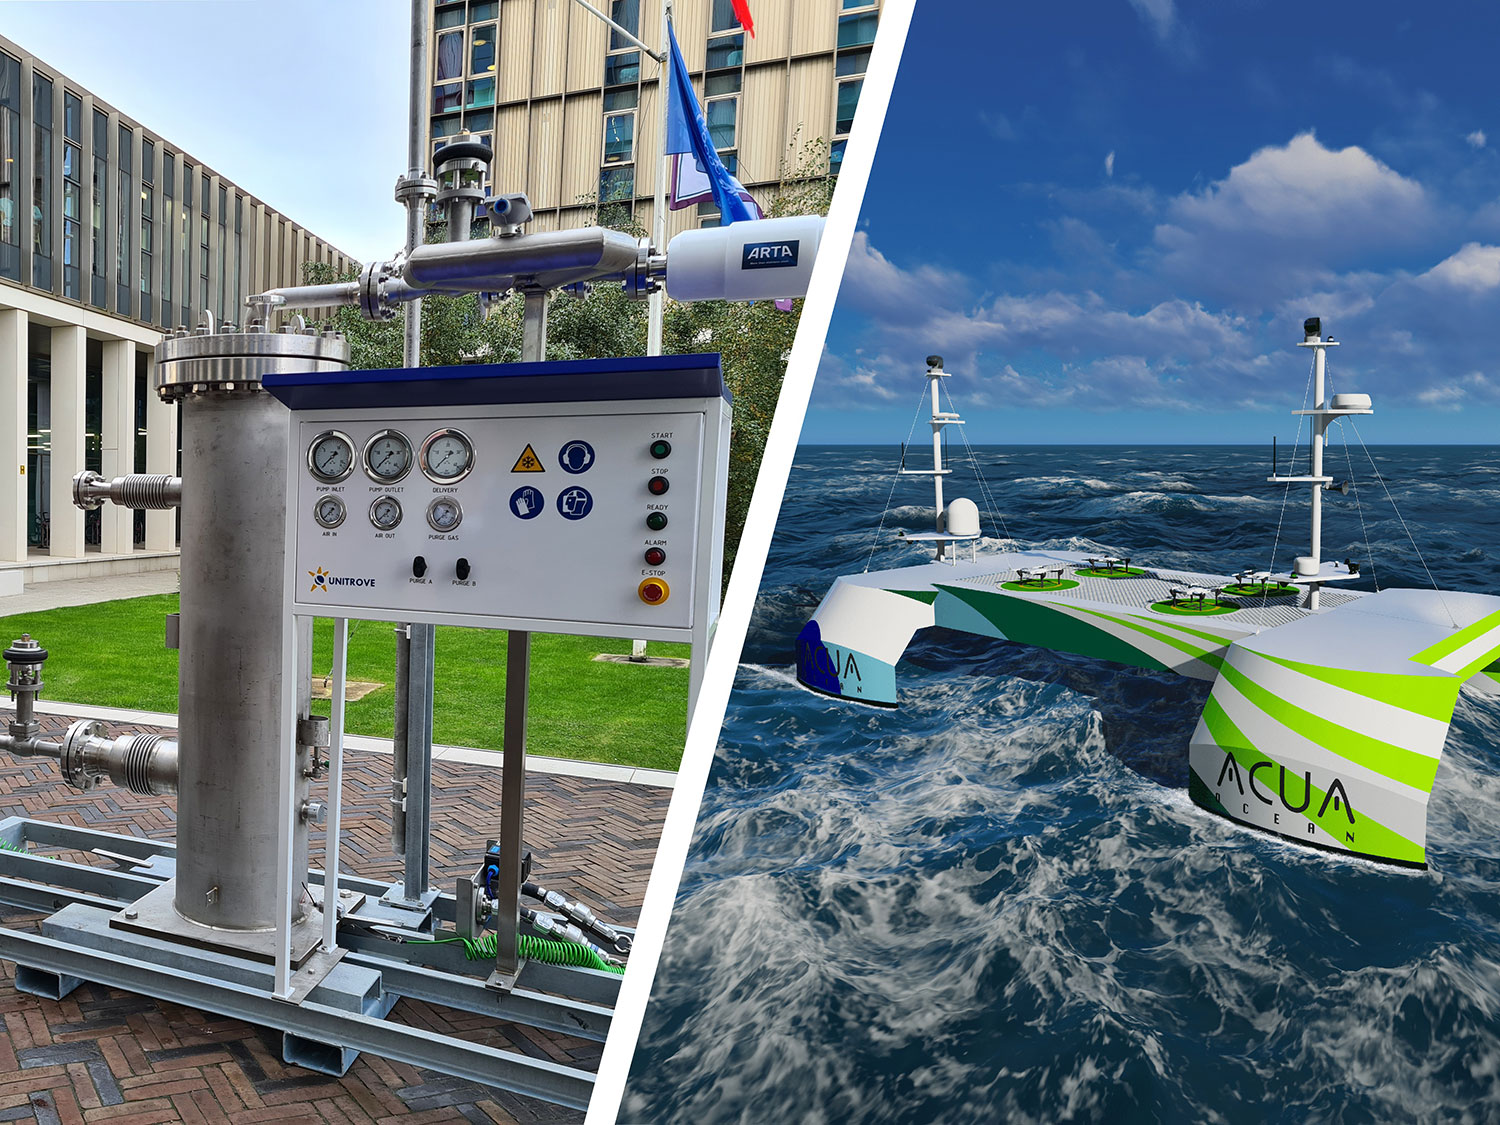 UK government backs £5.4m project for delivering world’s first liquid hydrogen autonomous vessel and infrastructure.